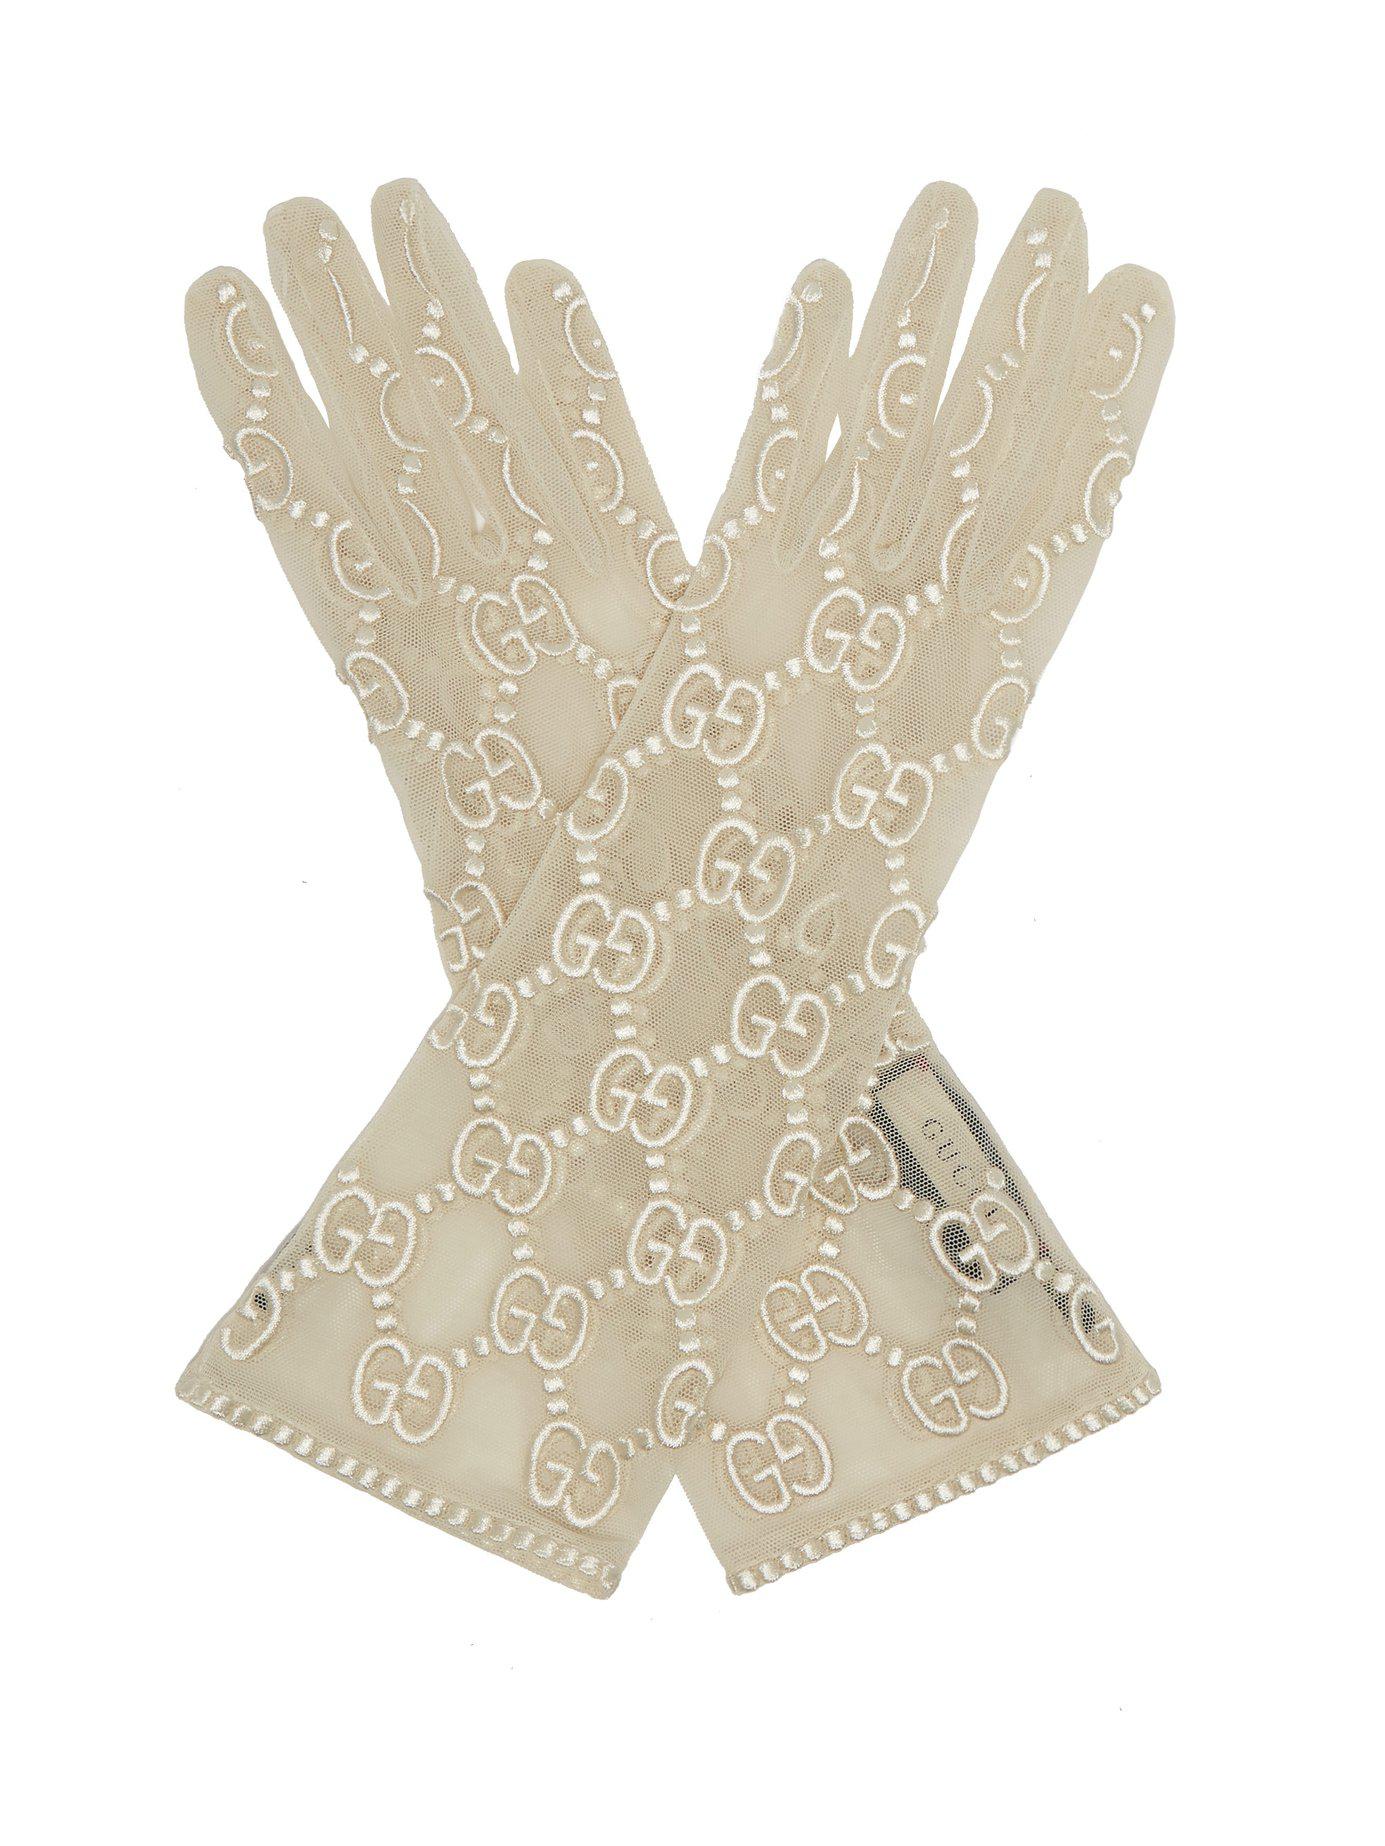 Look at these Beautiful Lace Gucci Gloves DHGate Replicas. Get them now at   : r/DHGateRepLadies